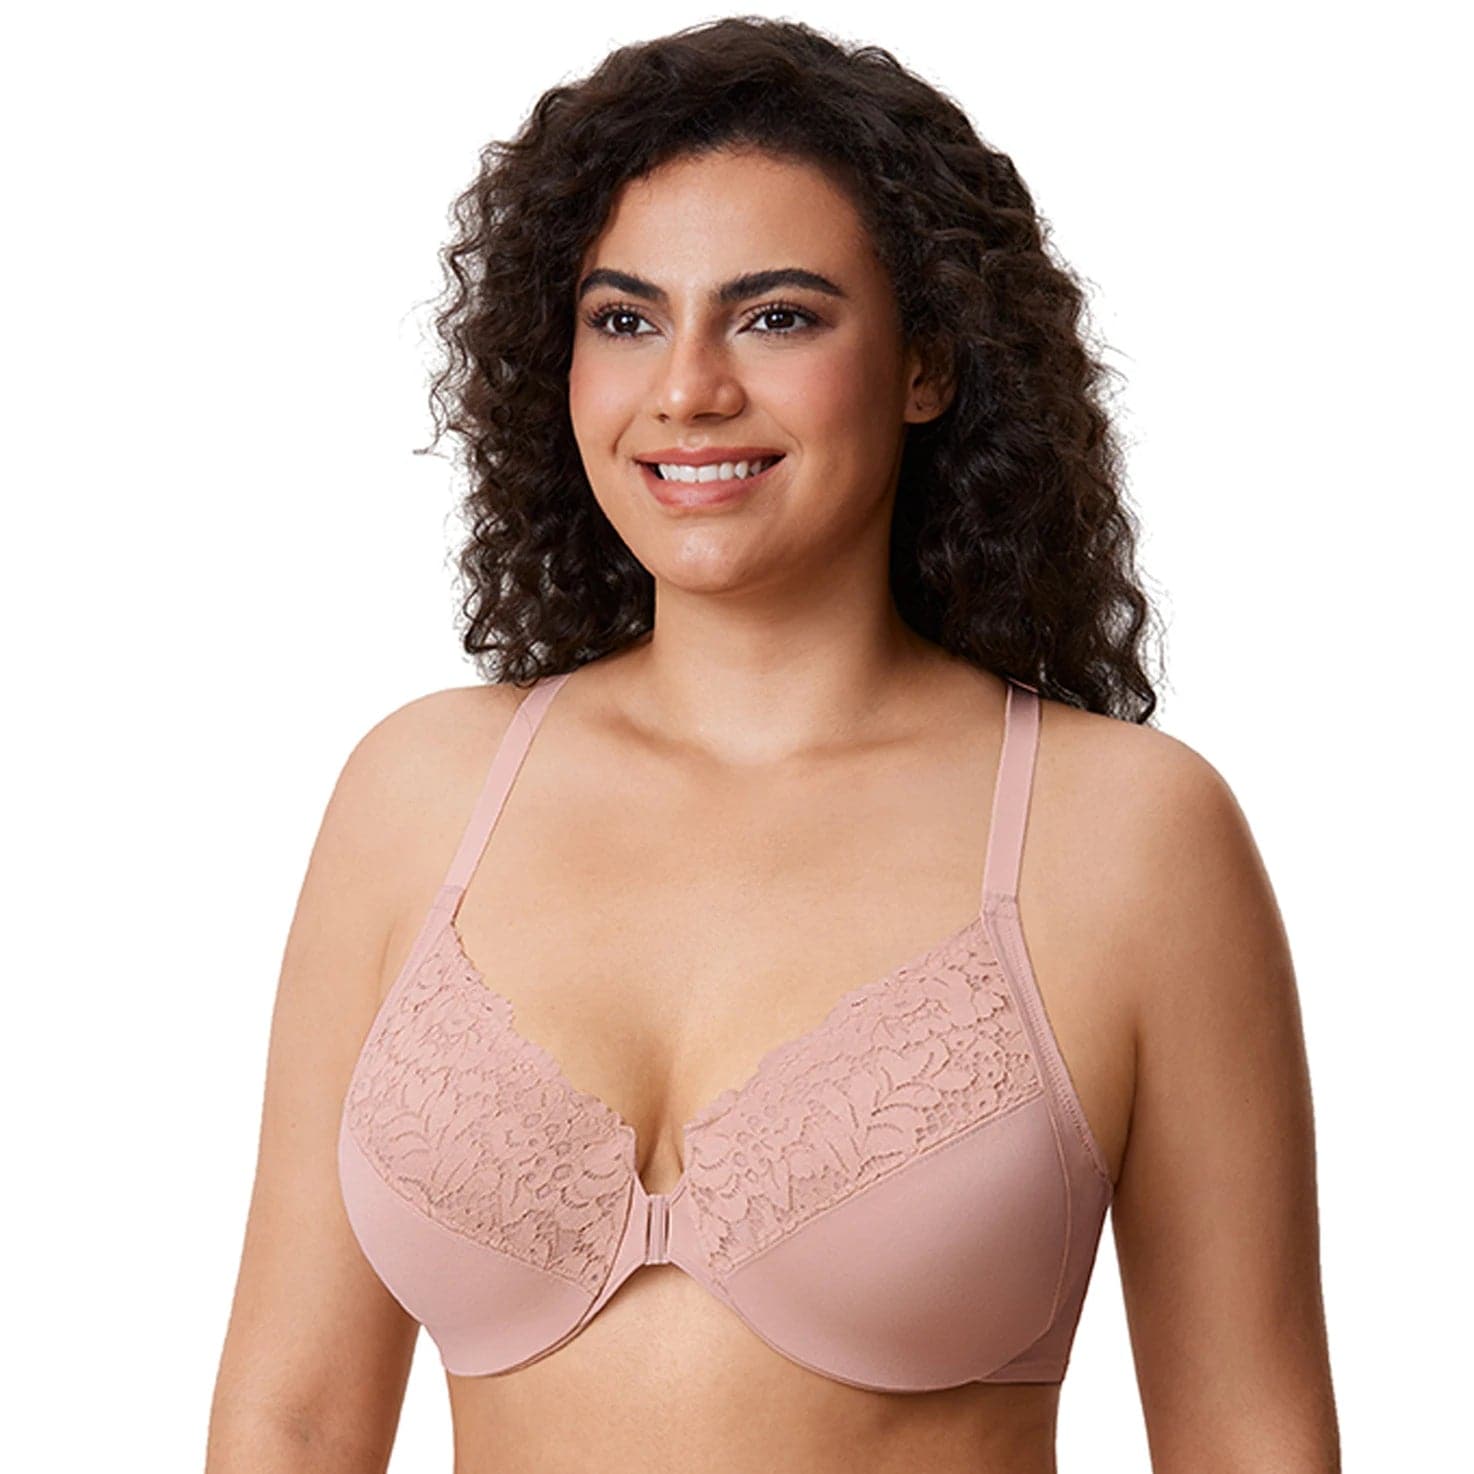 Supportive Underwire & Full Cup Design - Wandering Woman